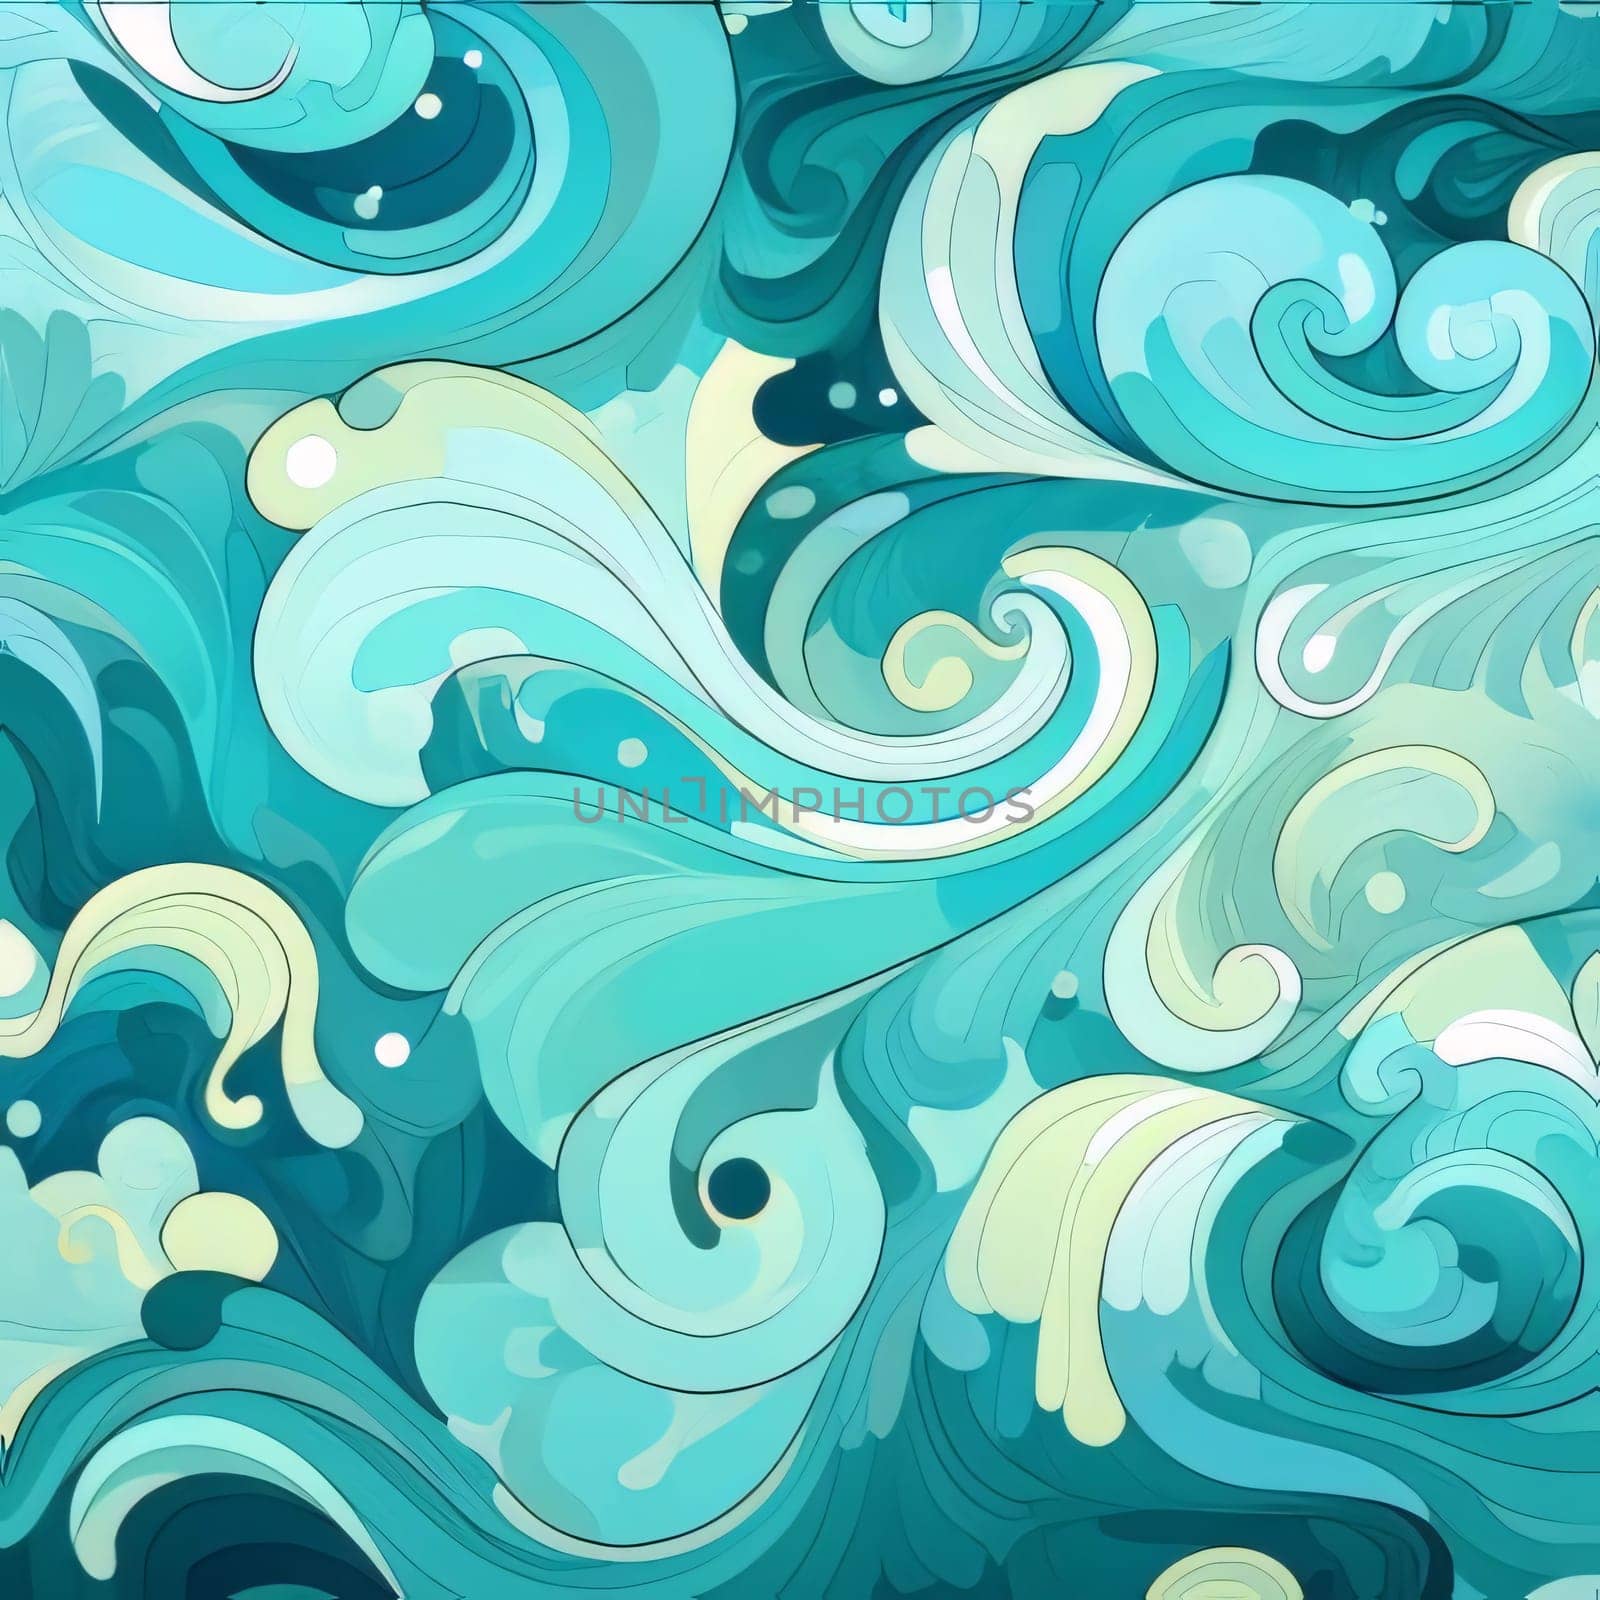 Abstract background design: Seamless watercolor pattern with waves. Hand-drawn illustration.